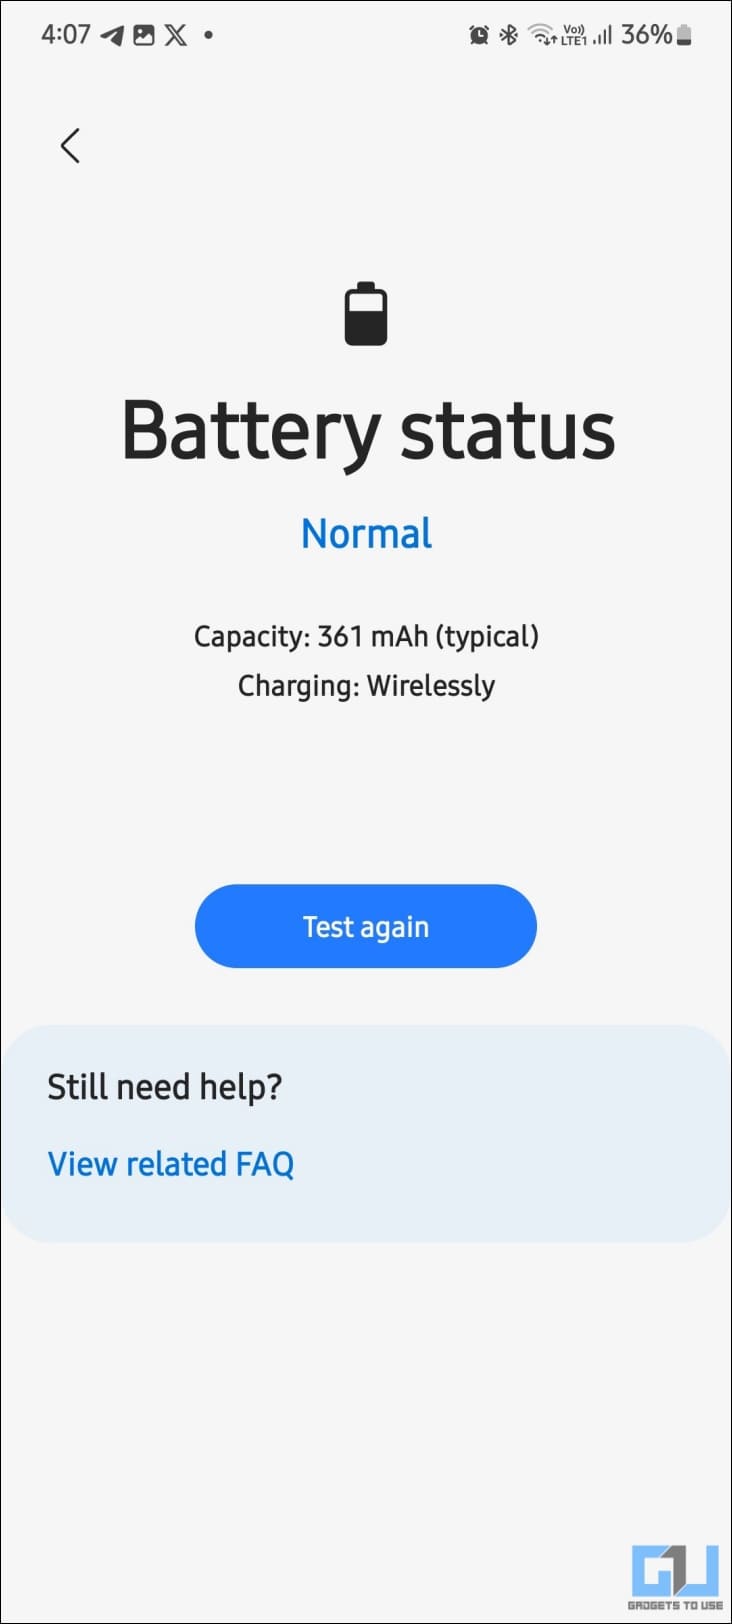 Diagnosis Tool Says the Battery Health is Normal